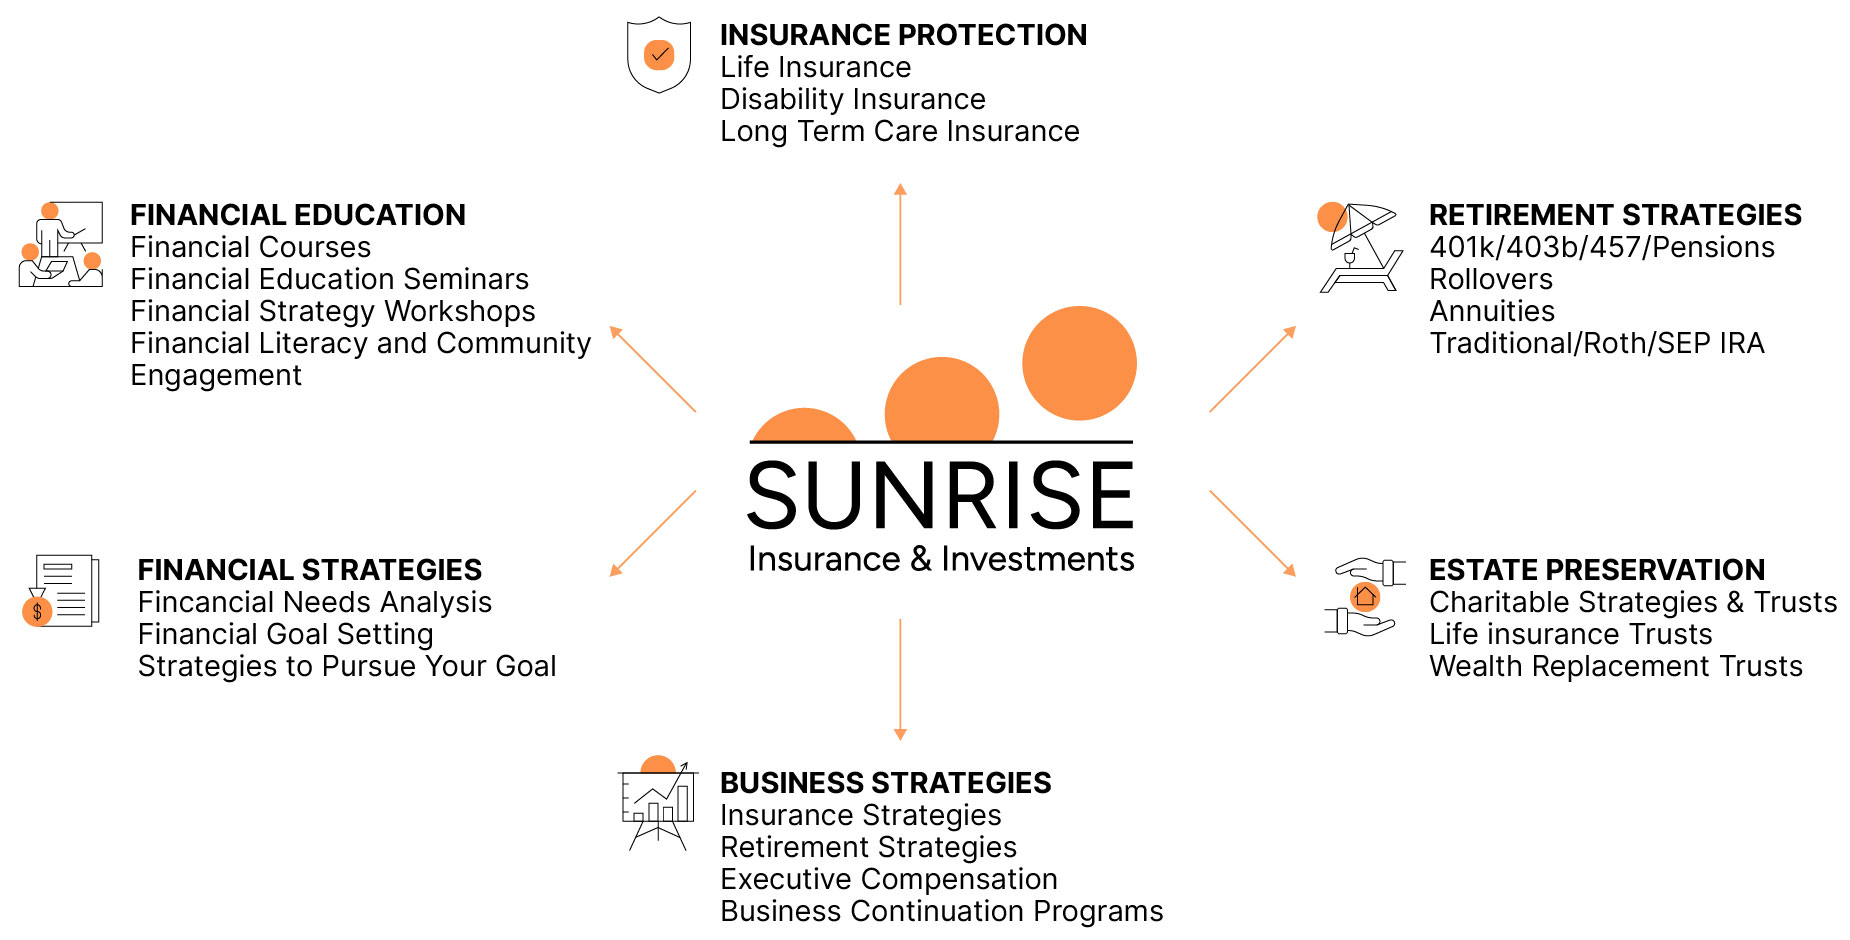 How Sunrise Insurance & Investments Can Help Infographic